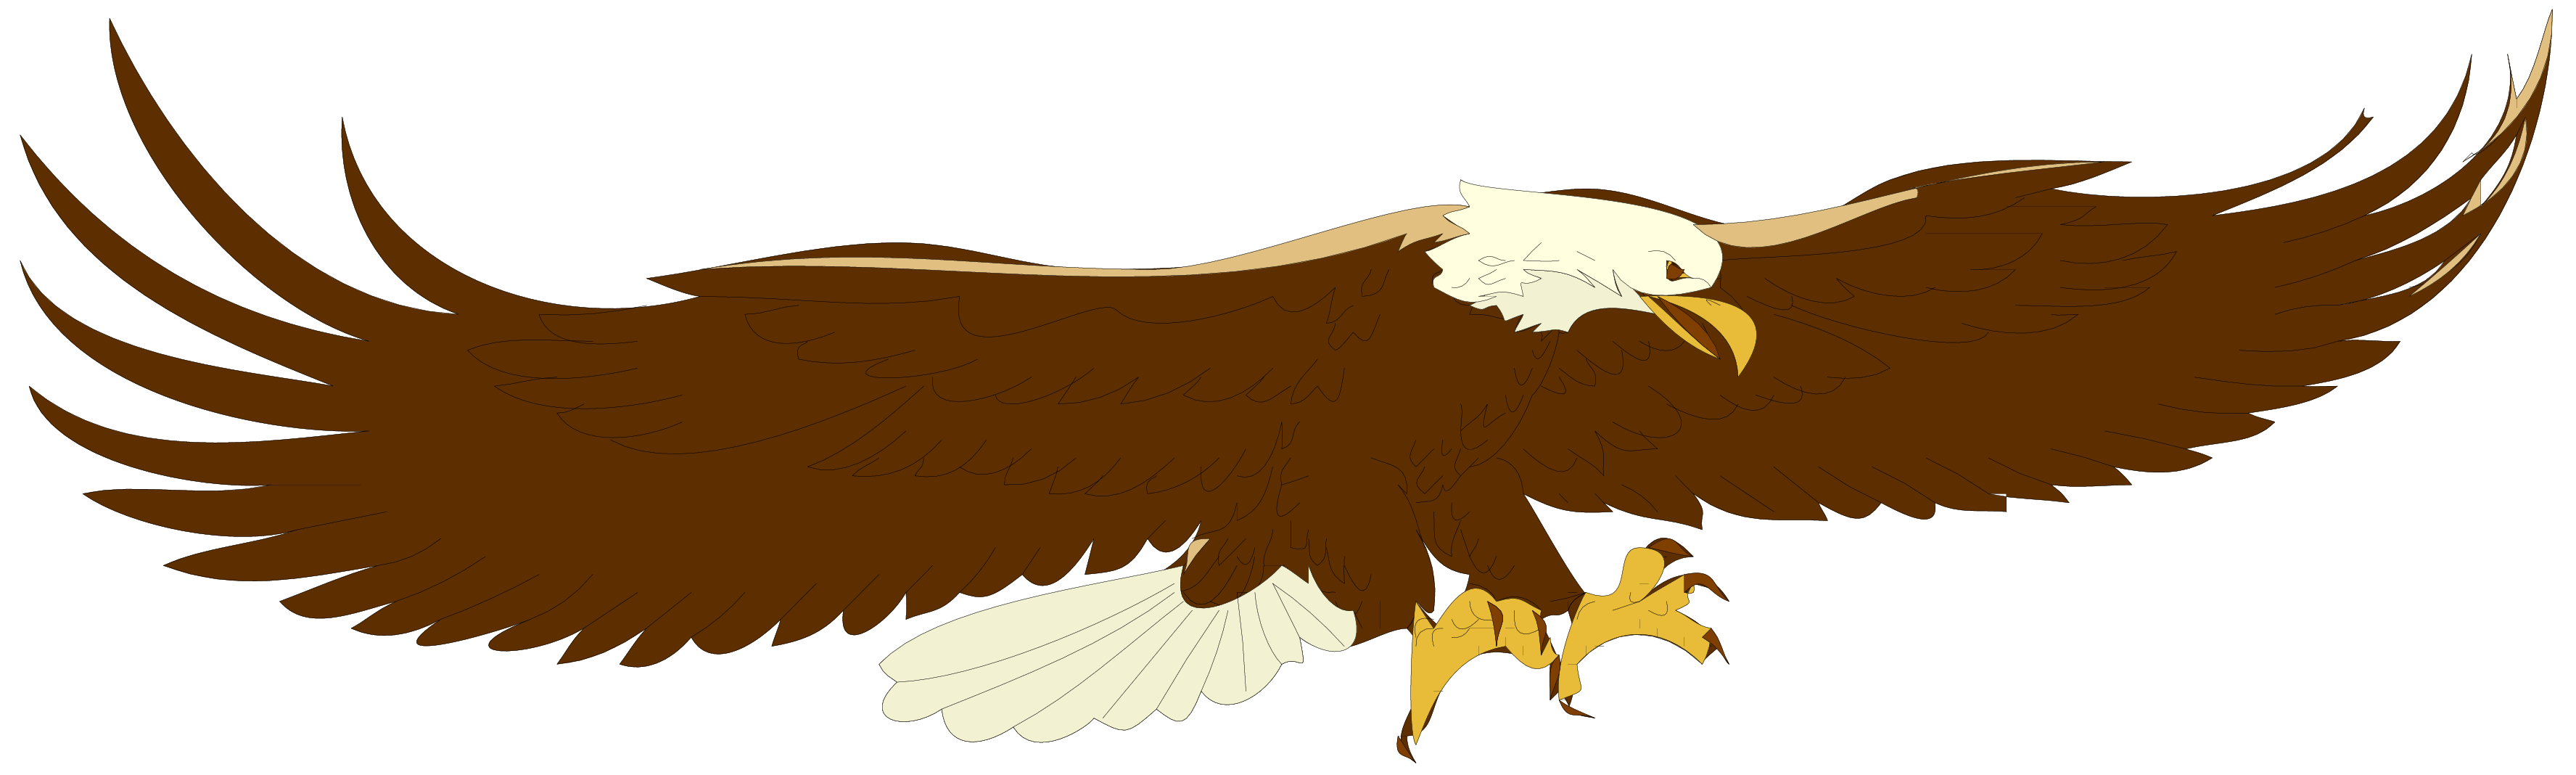 Bald Eagle Free Download Clipart